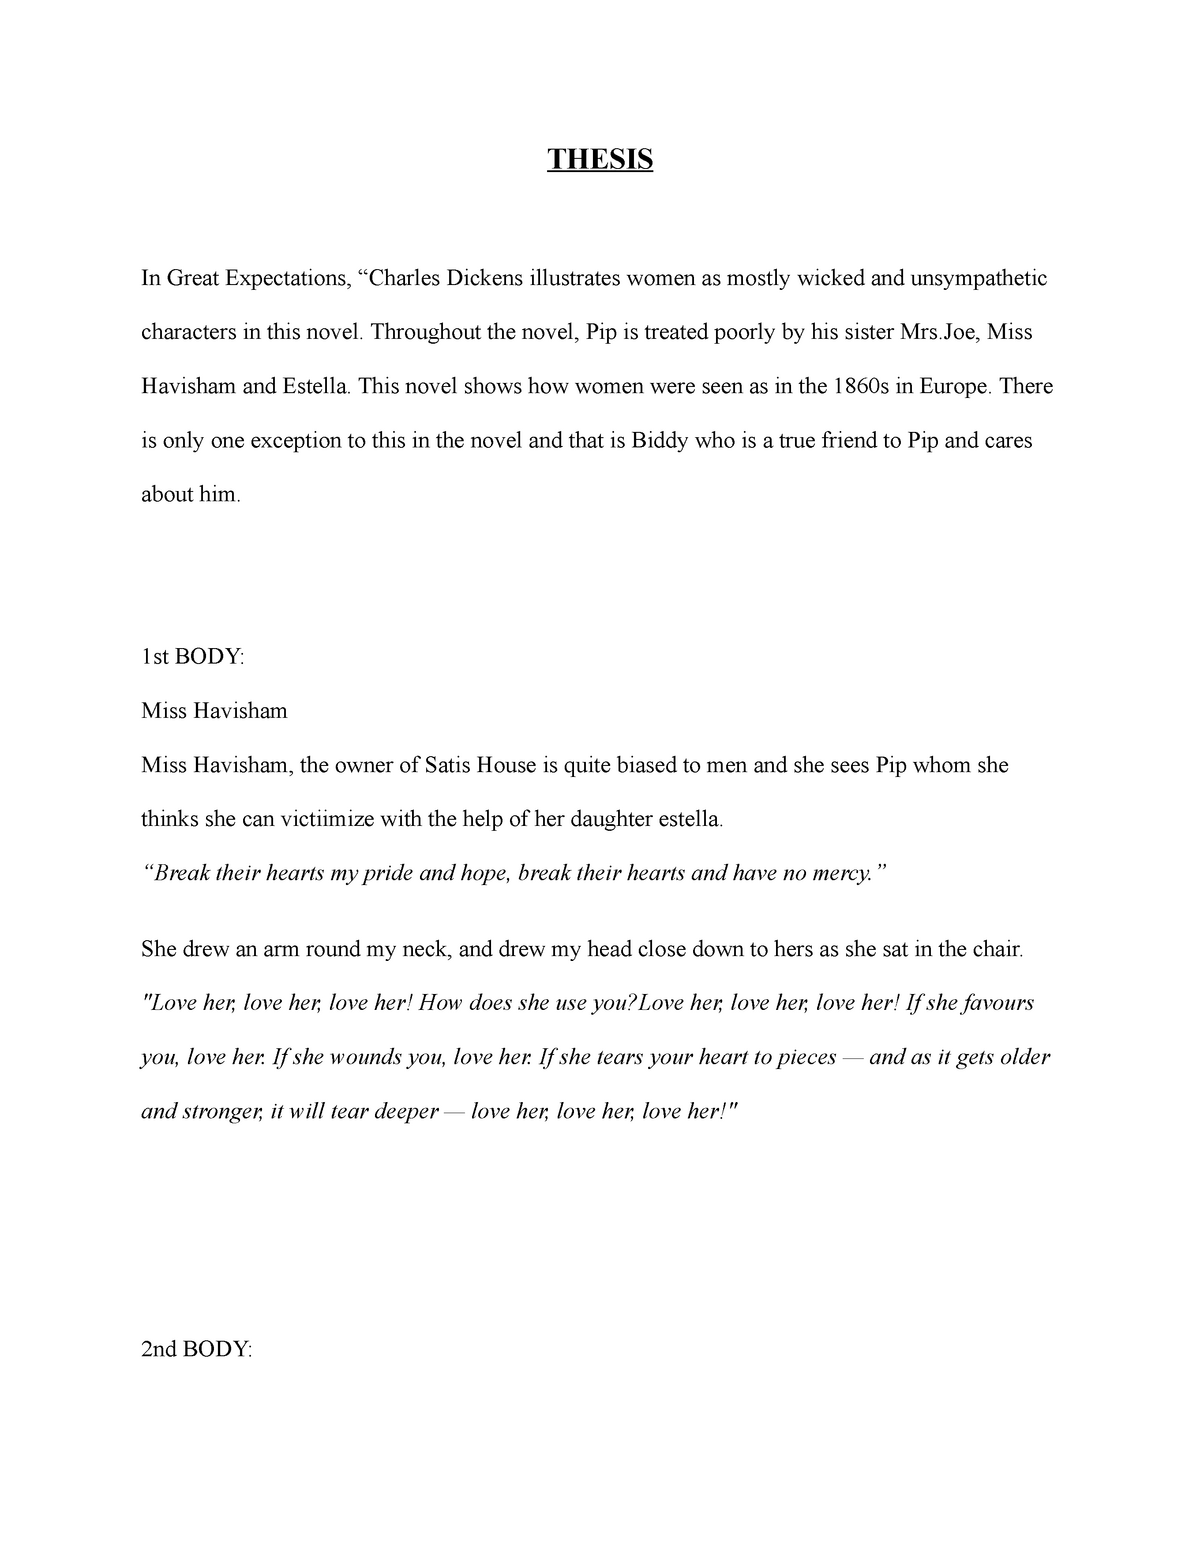 great expectations thesis pdf